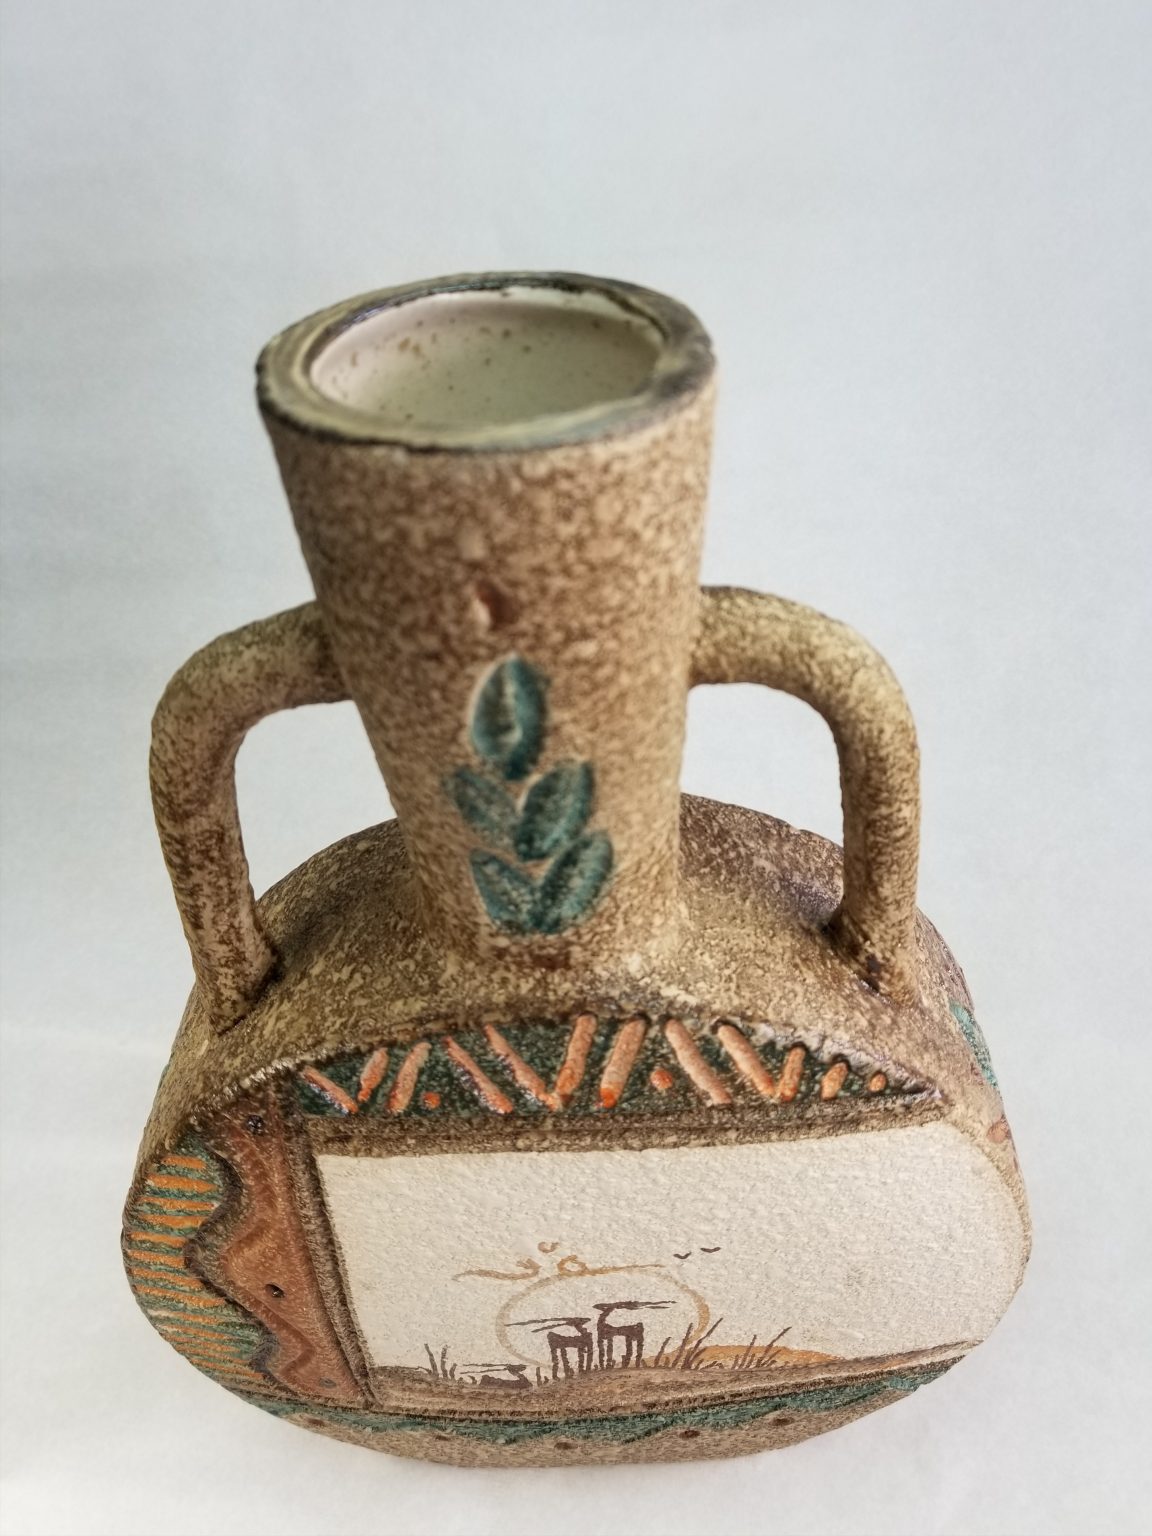 Ancient sialk ceramic wine/water decanter - HighTouch 